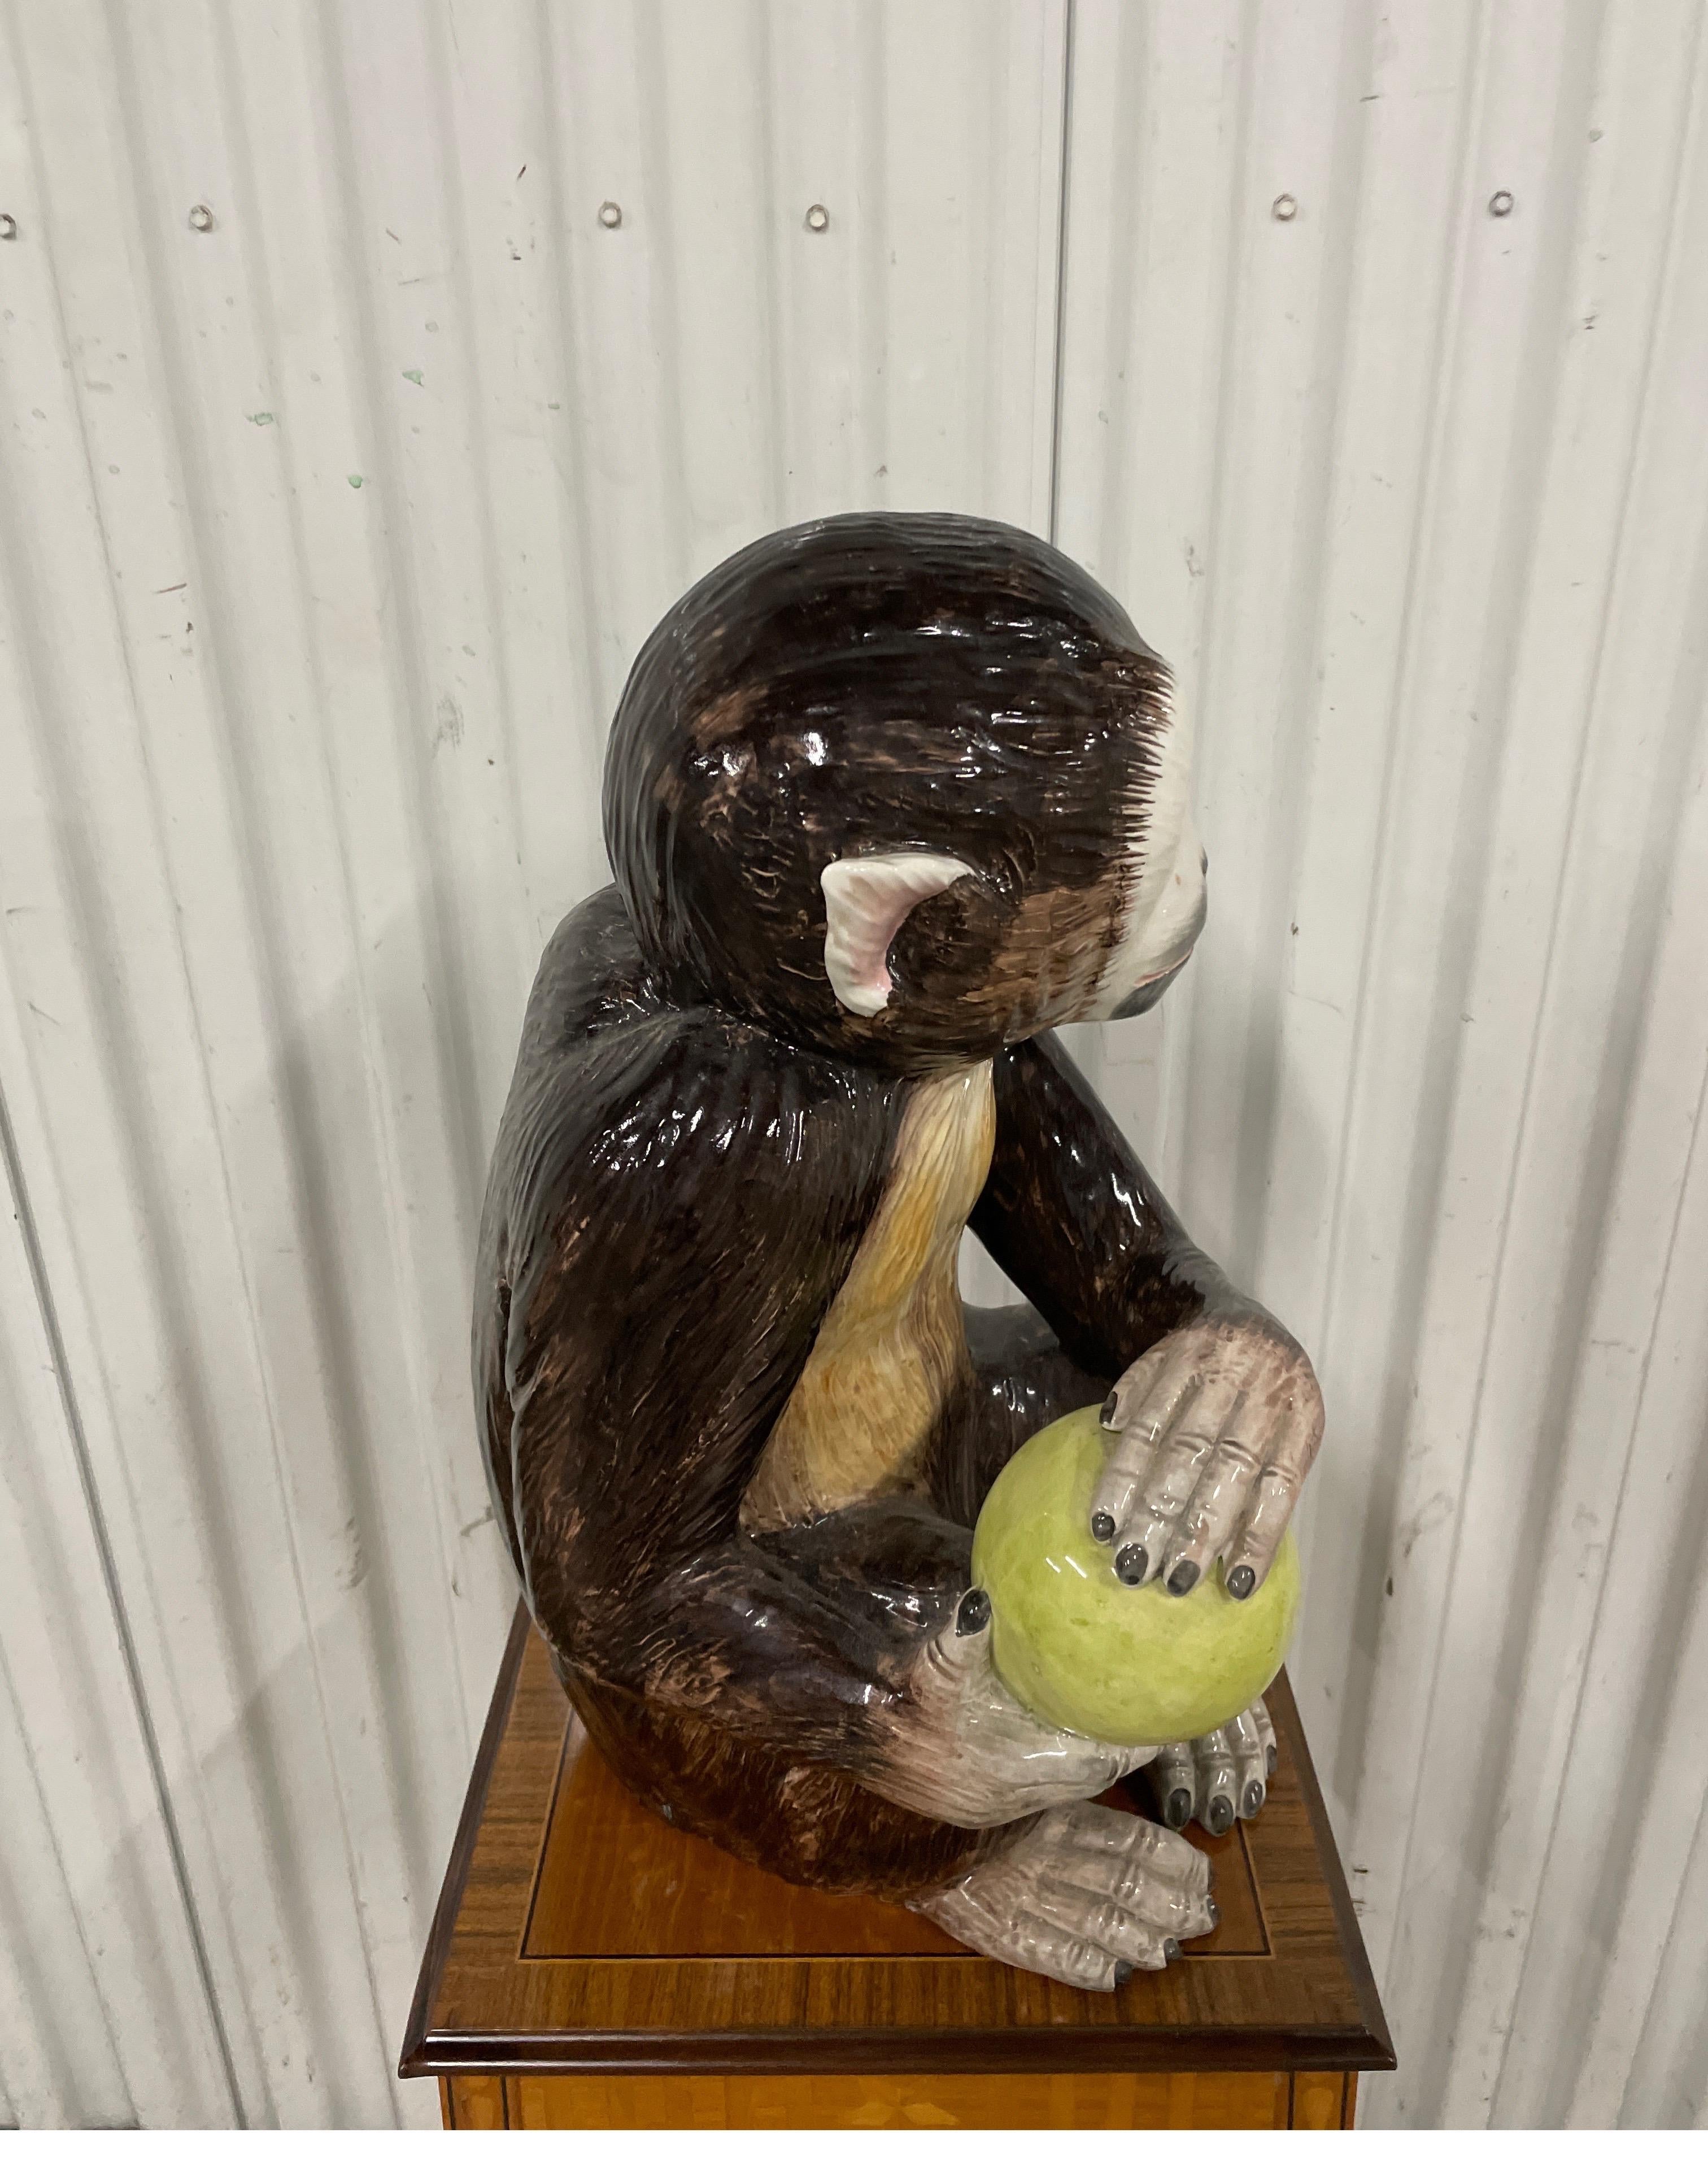 Whimsical hand painted ceramic monkey.  Made in Italy between 1970 & 1979. 
Very good condition. A very sweet piece.